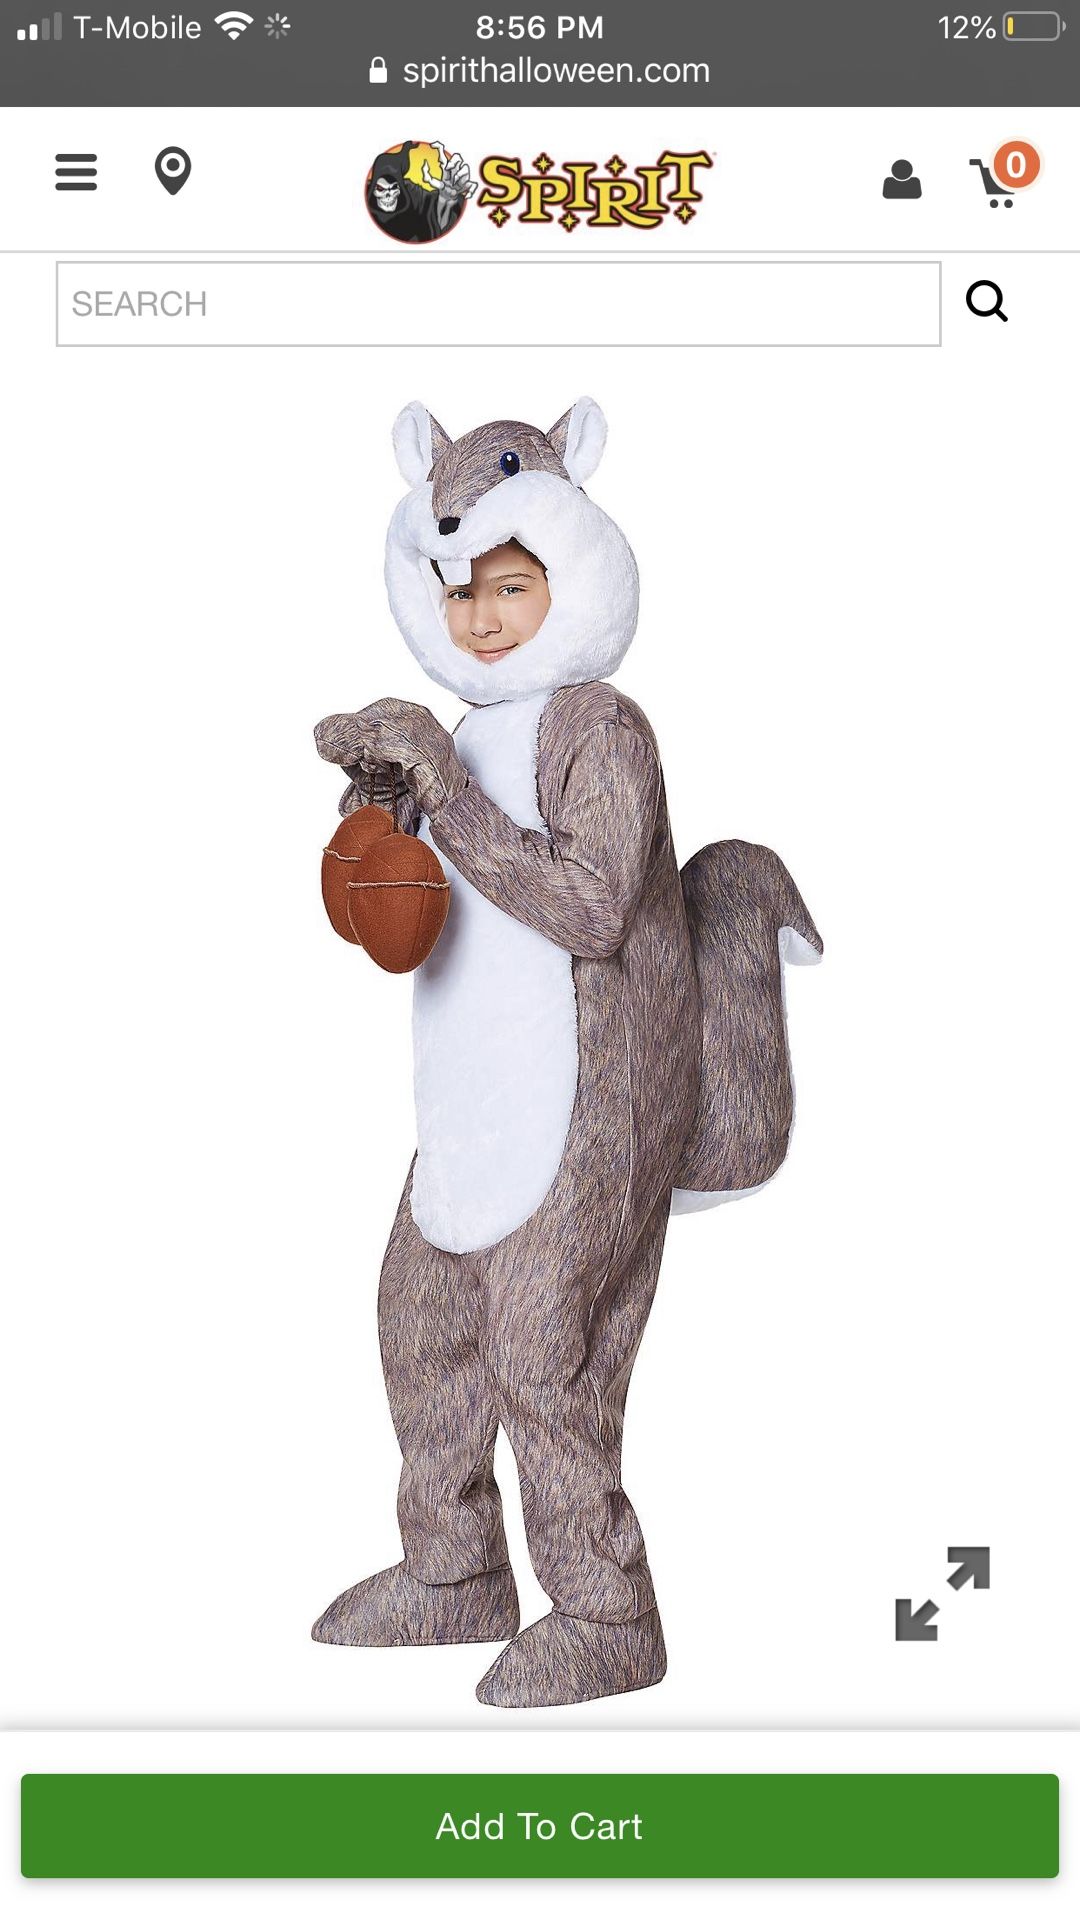 ISO Small Kids Squirrel Costume 